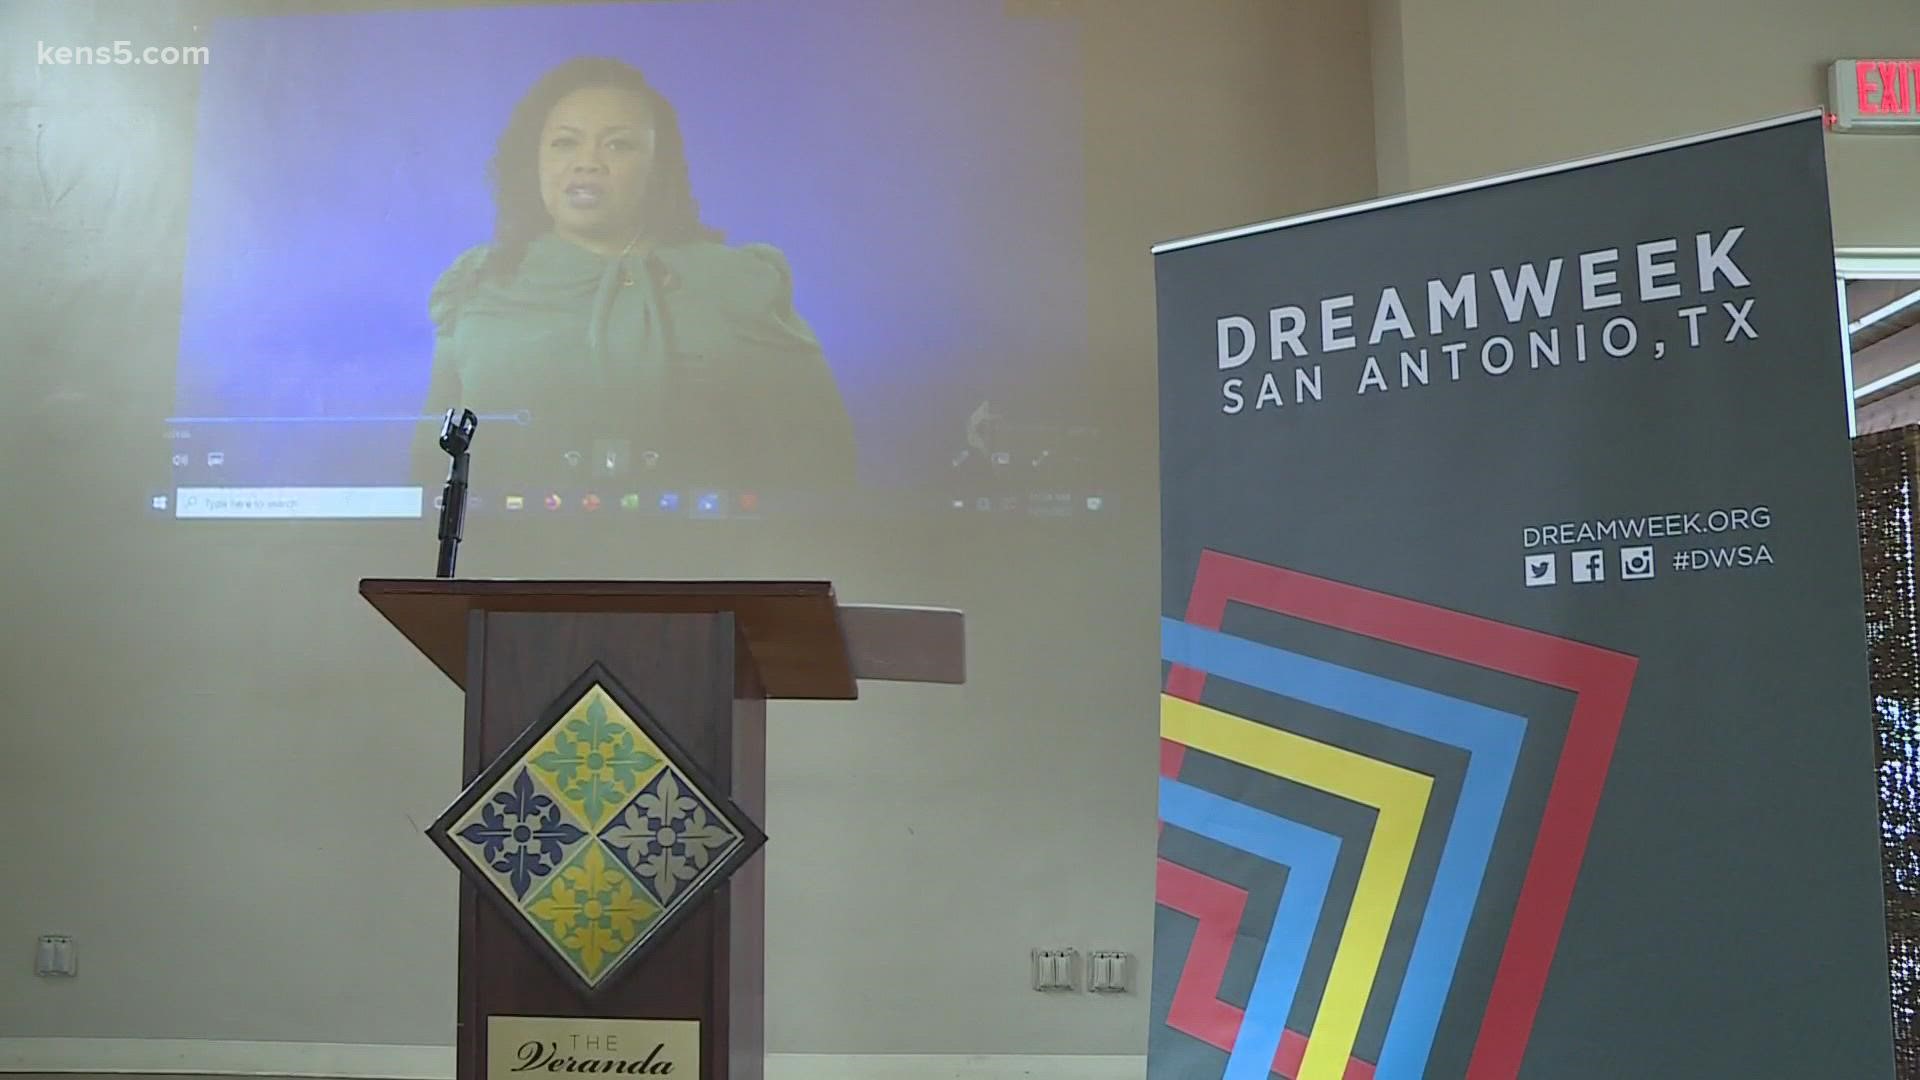 DreamWeek started in San Antonio and it's the largest community-curated event of its kind.